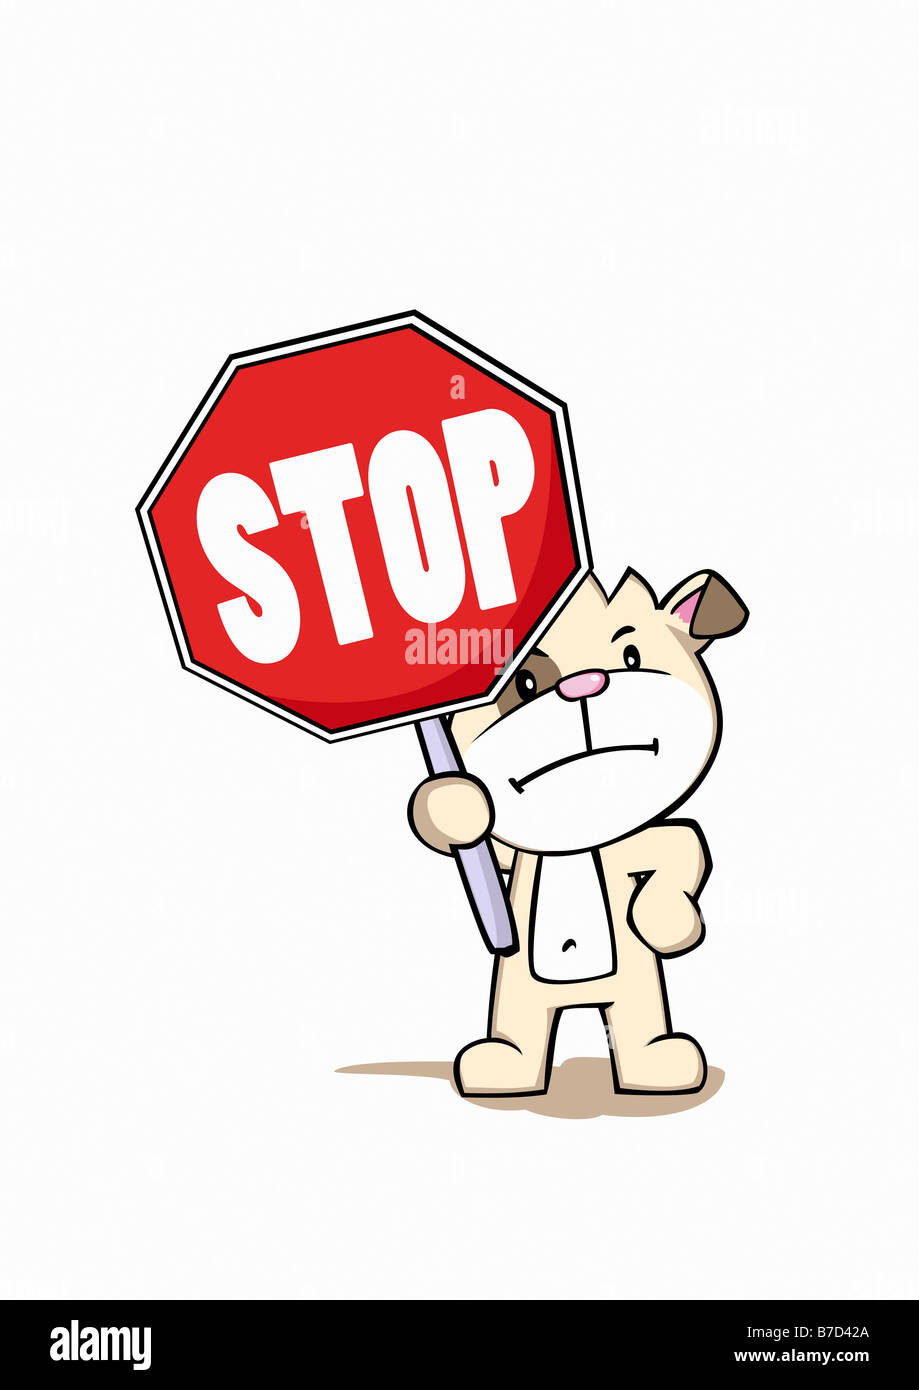 A cartoon dog holding a traffic stop sign Stock Photo